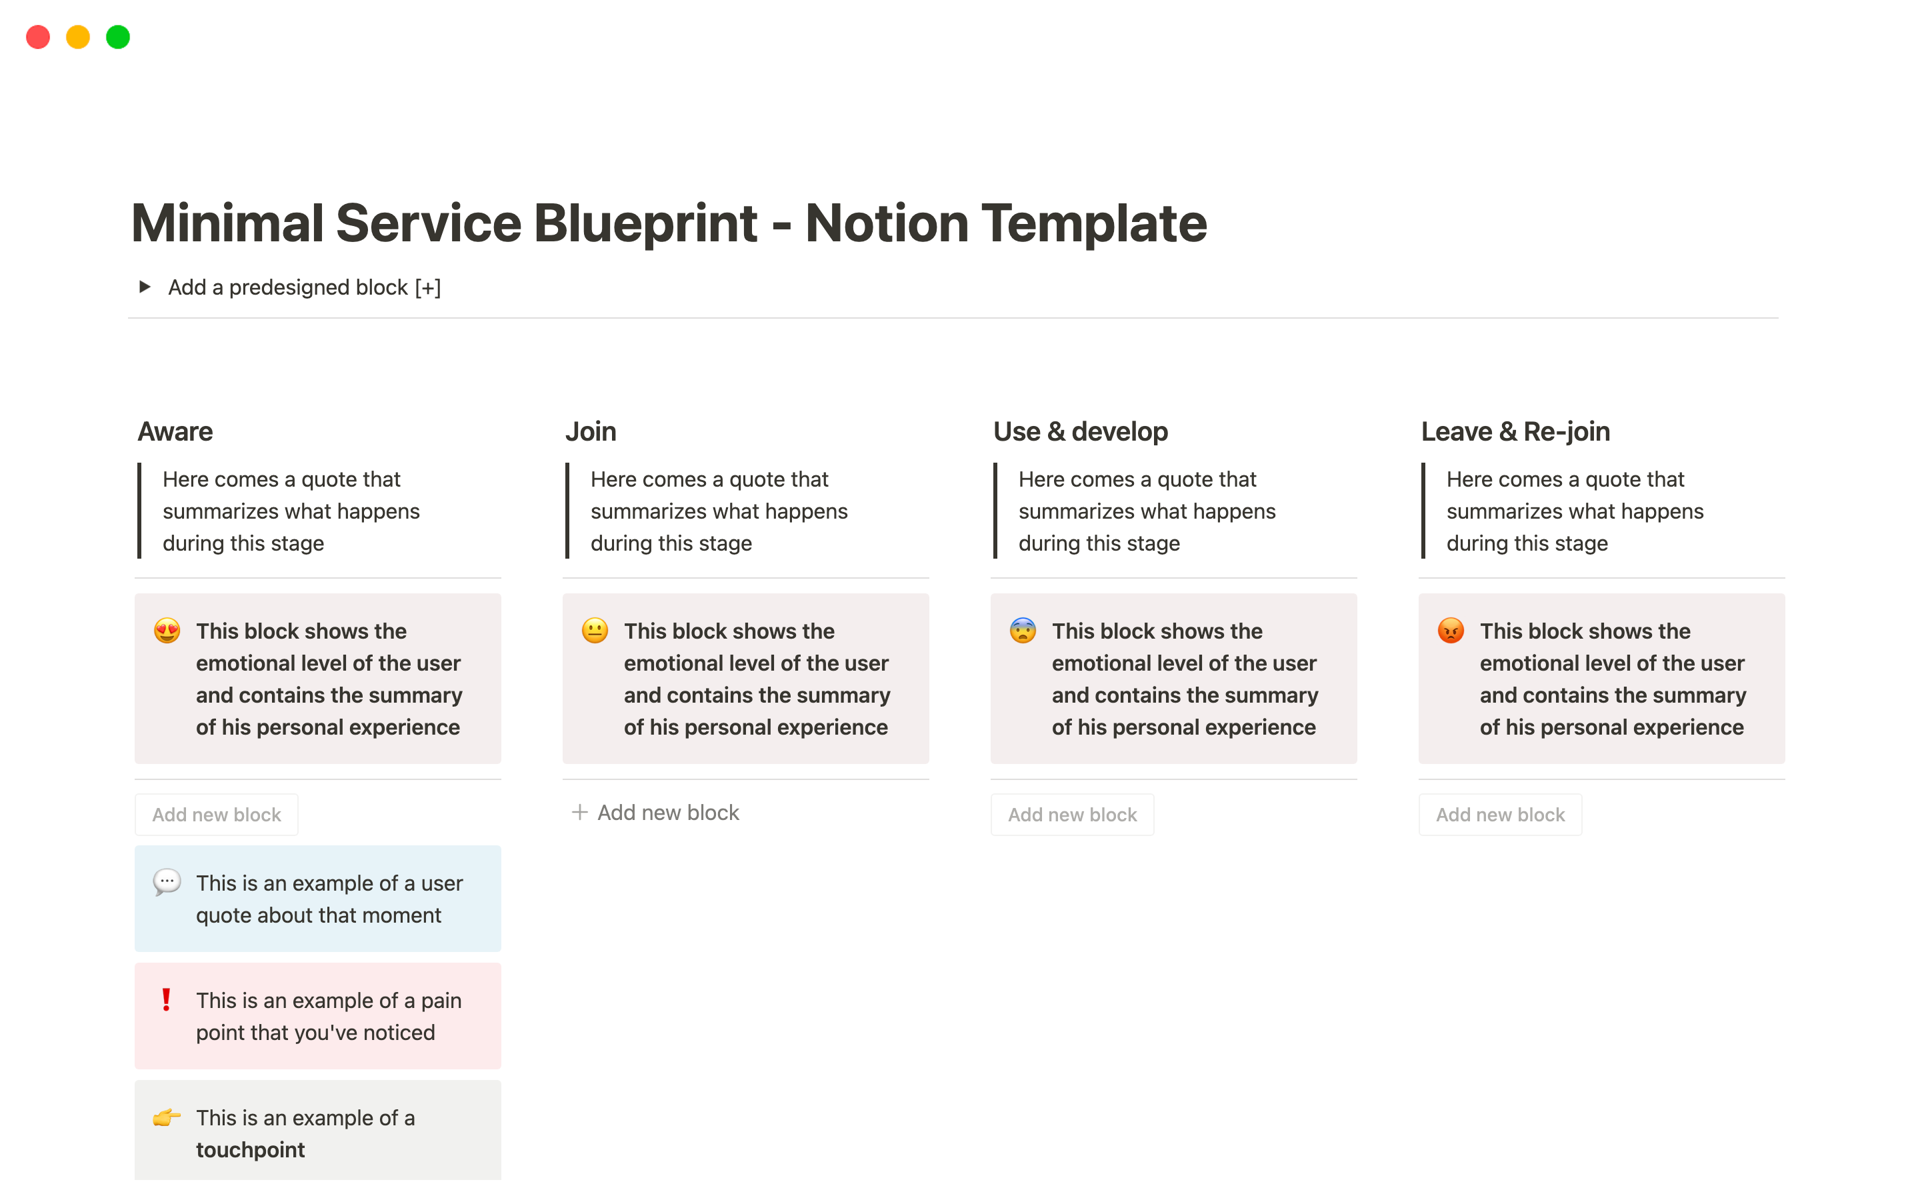 Create, share and export your next Service Blueprint directly within Notion.